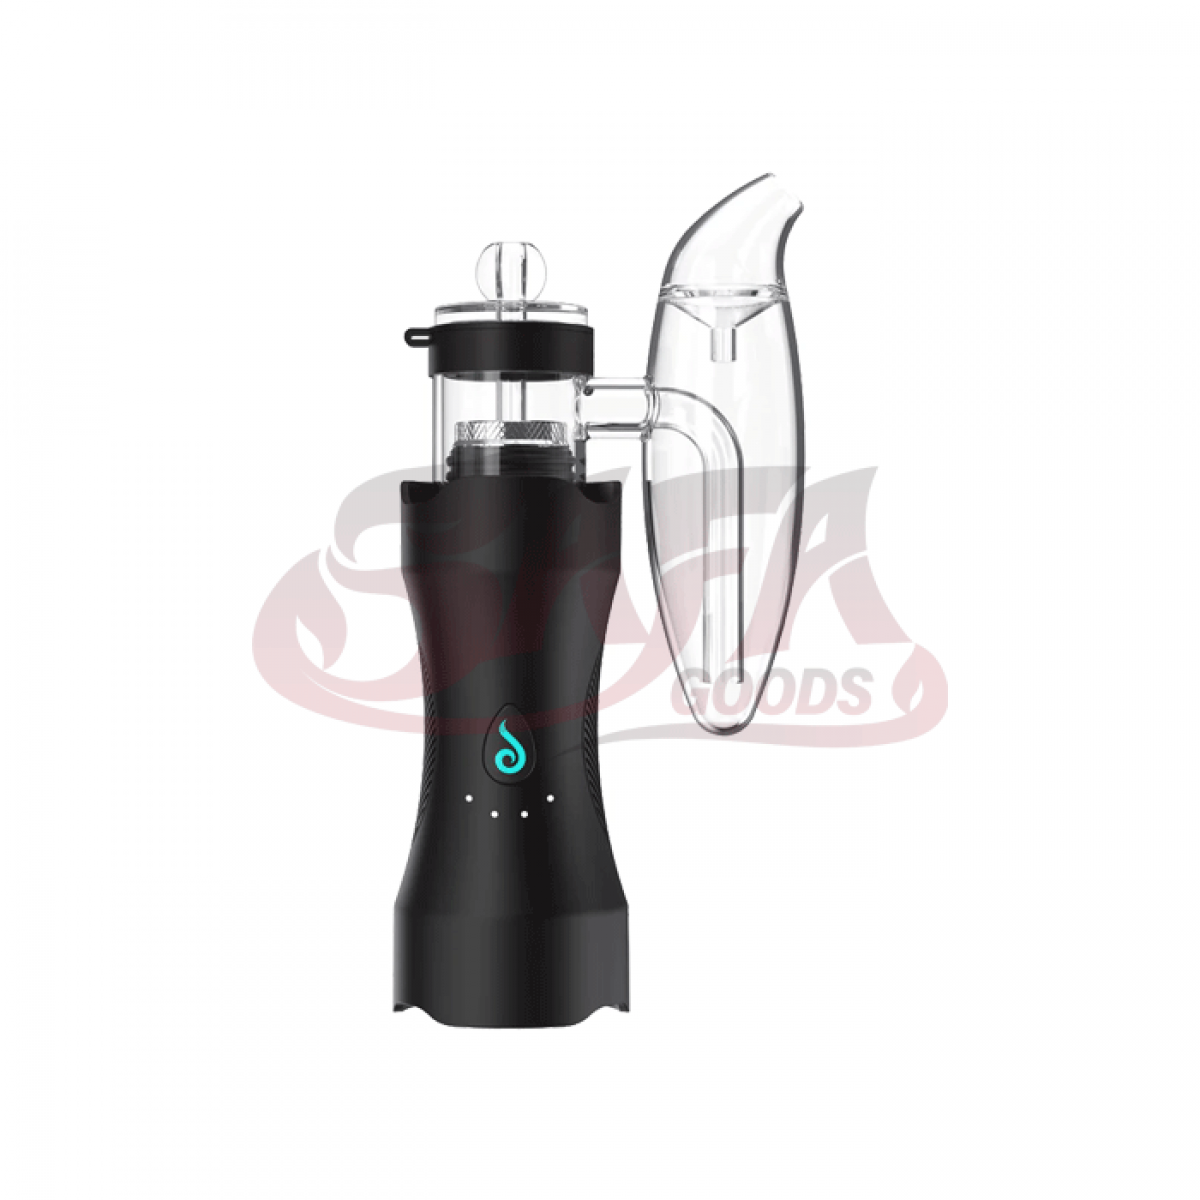 Dr Dabber "XS" Electronic Dab Rig